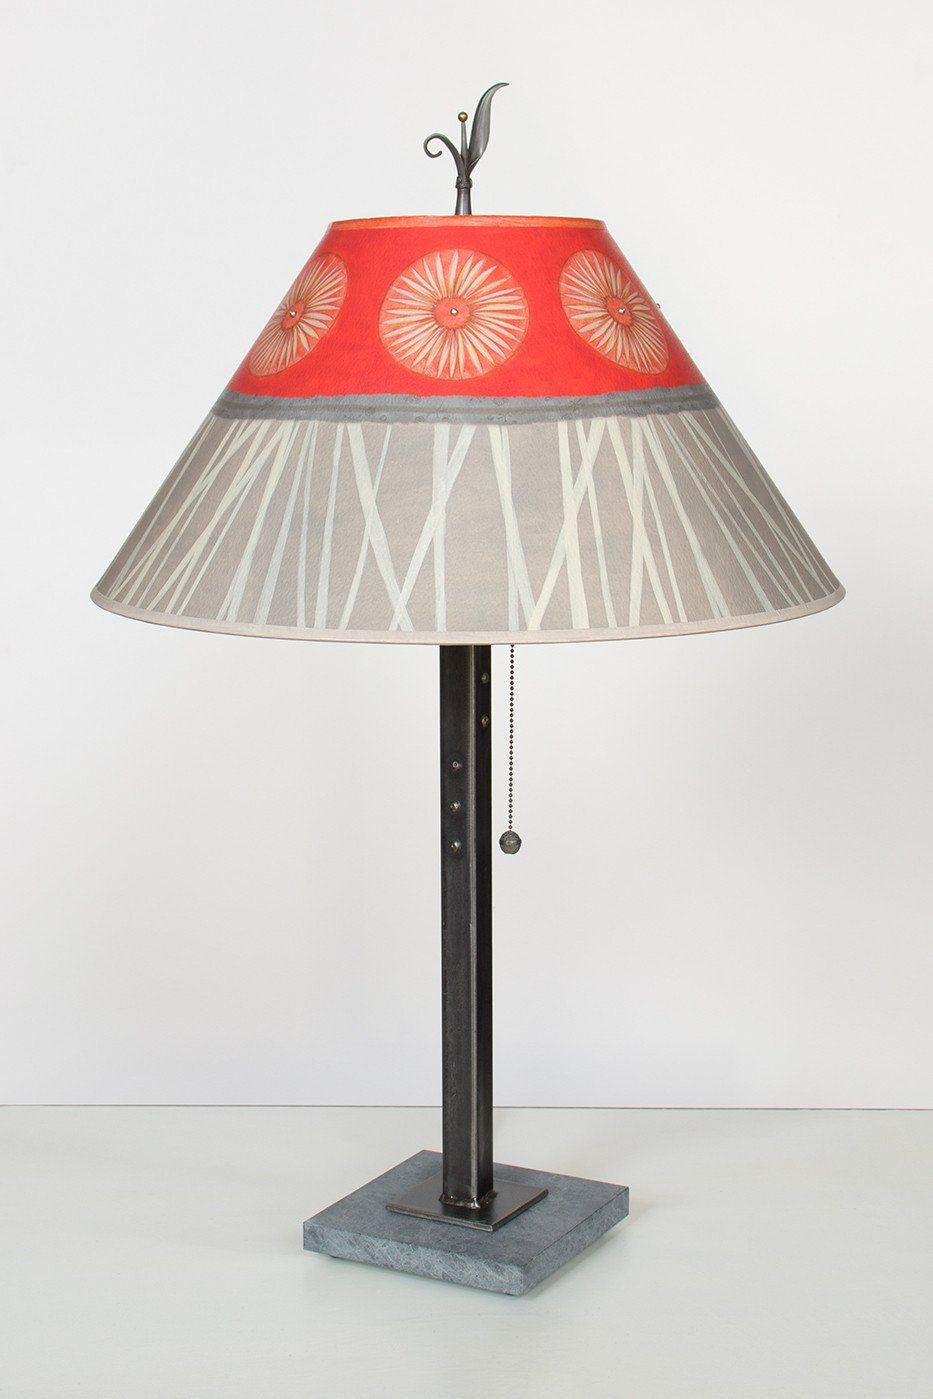 Janna Ugone &amp; Co Table Lamps Steel Table Lamp with Large Conical Shade in Tang